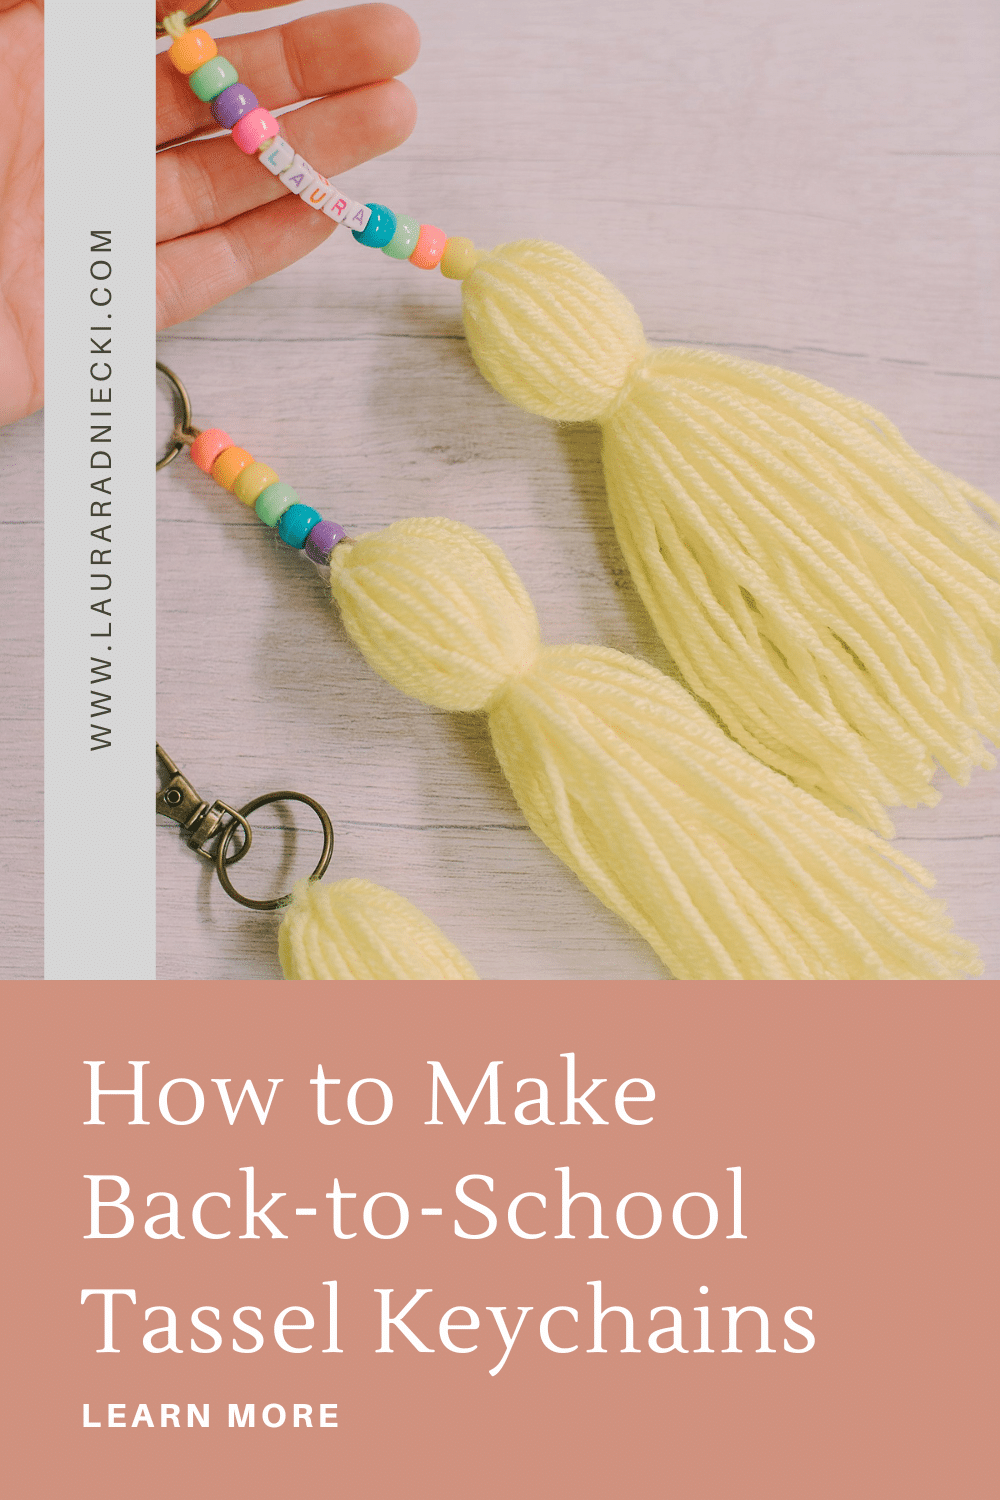 How to make back to school yarn keychains for backpacks and lunchboxes